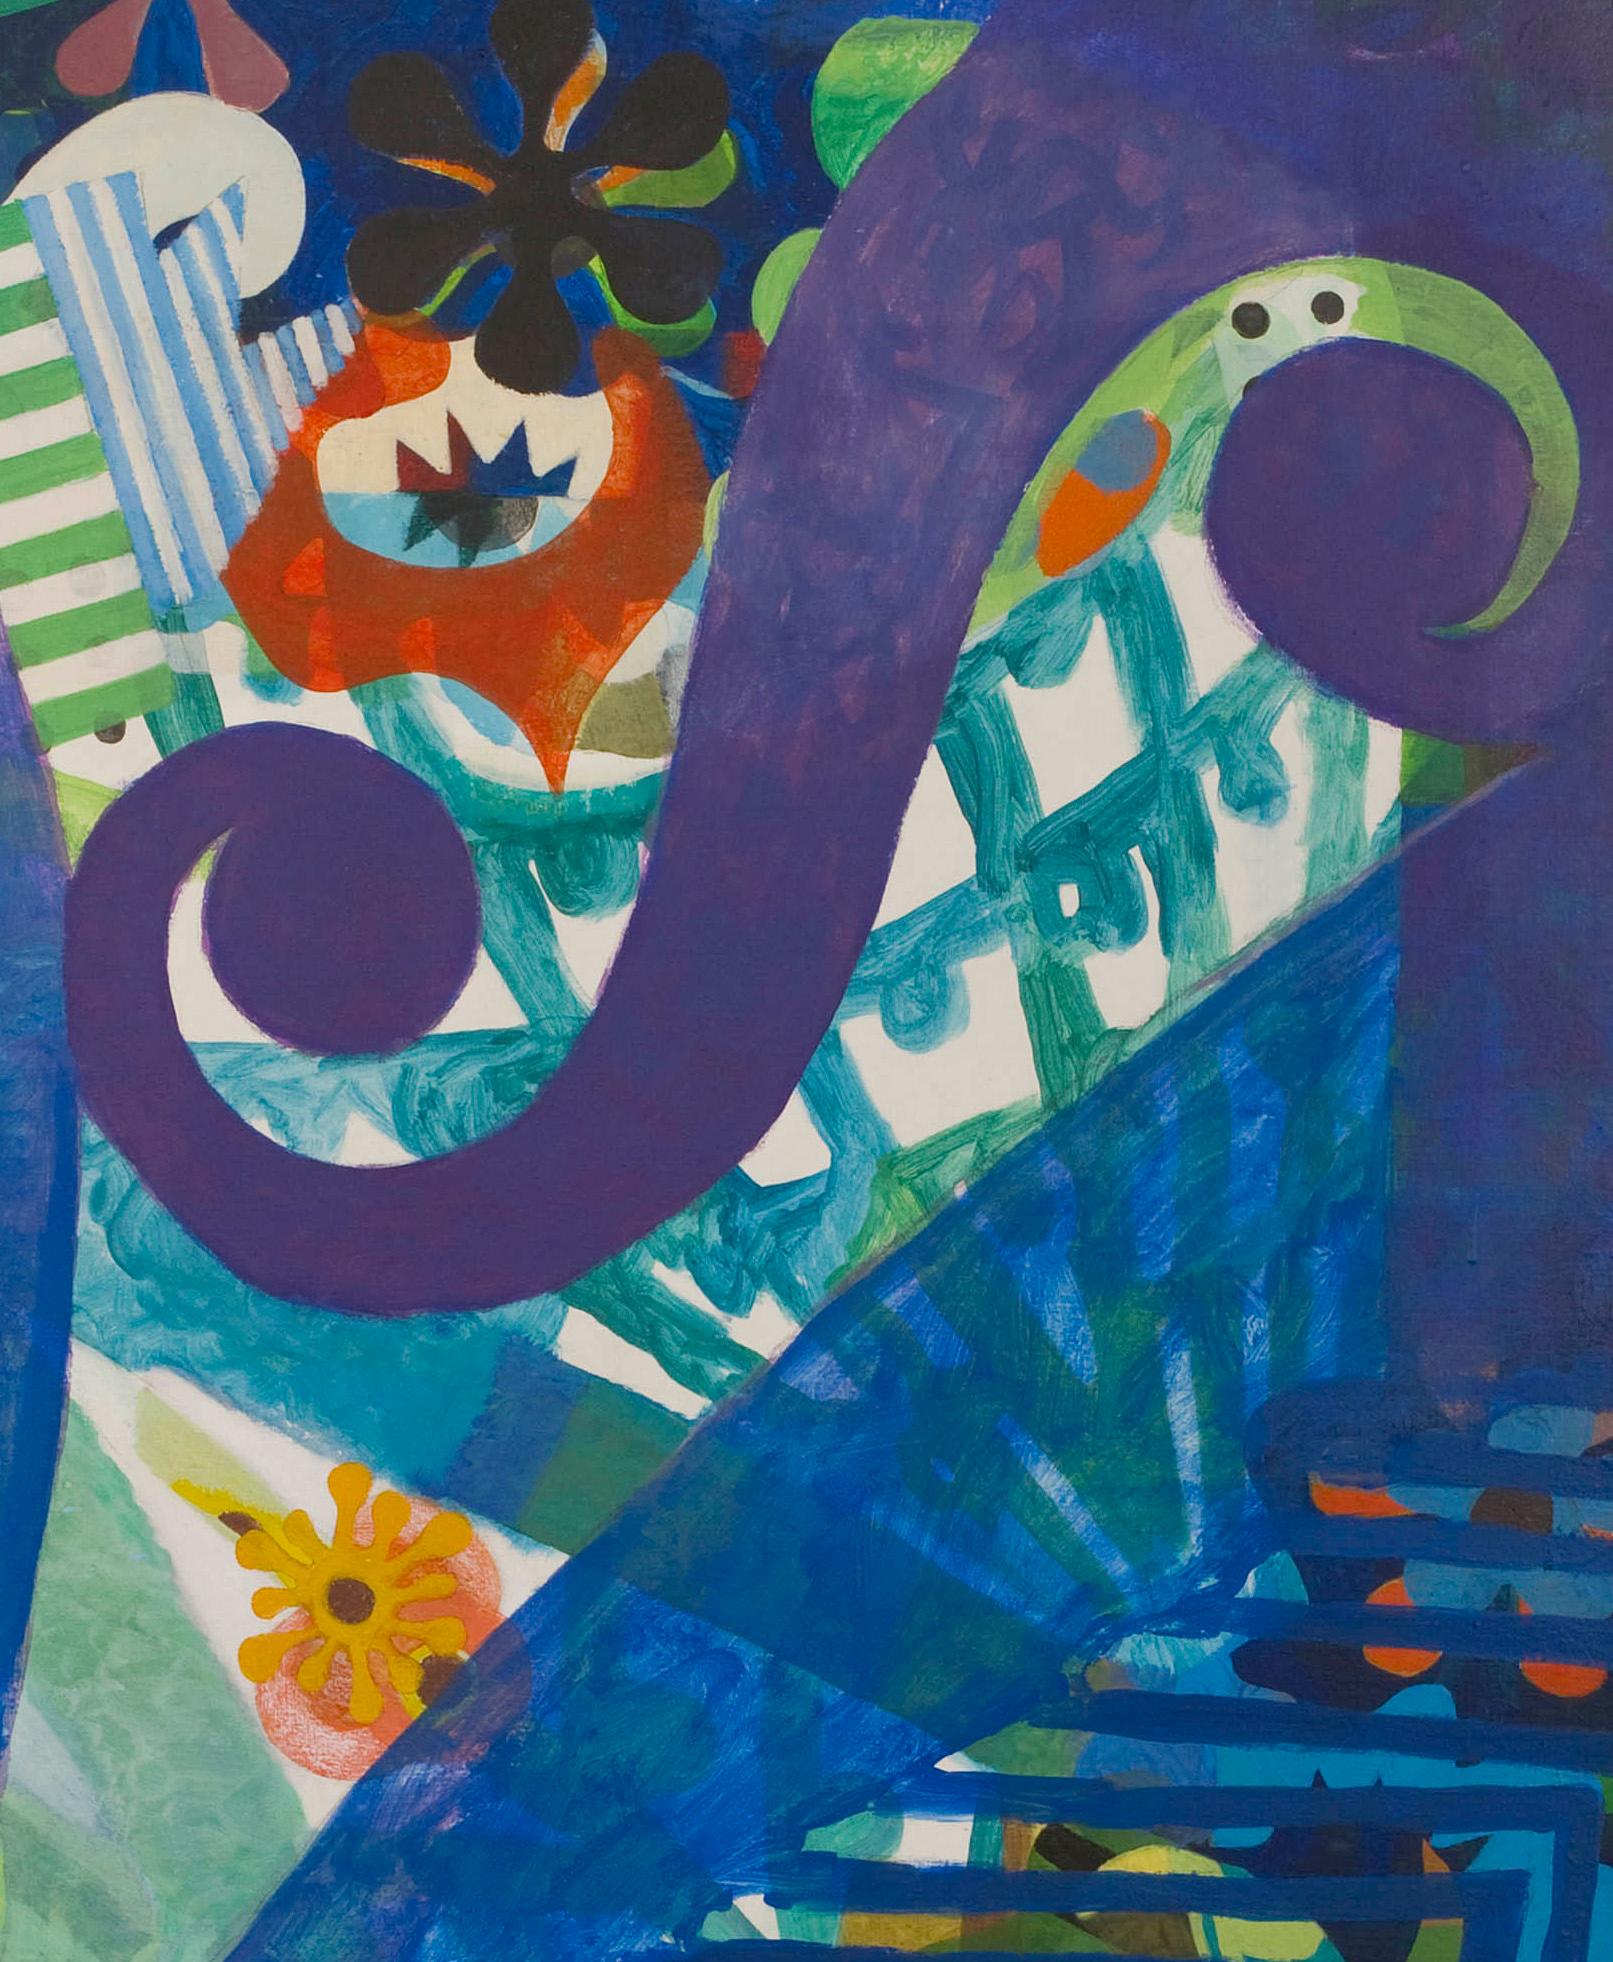 Eileen Agar (1899-1991)
Tropic of Music
1969
oil on canvas
127 x 102 cm
signed ‘AGAR’; signed and dated ‘AGAR 1969’ (on the verso)

Provenance:
Private collection, UK (acquired from the artist in the 1970s)

Exhibited:
Edinburgh, Scottish National